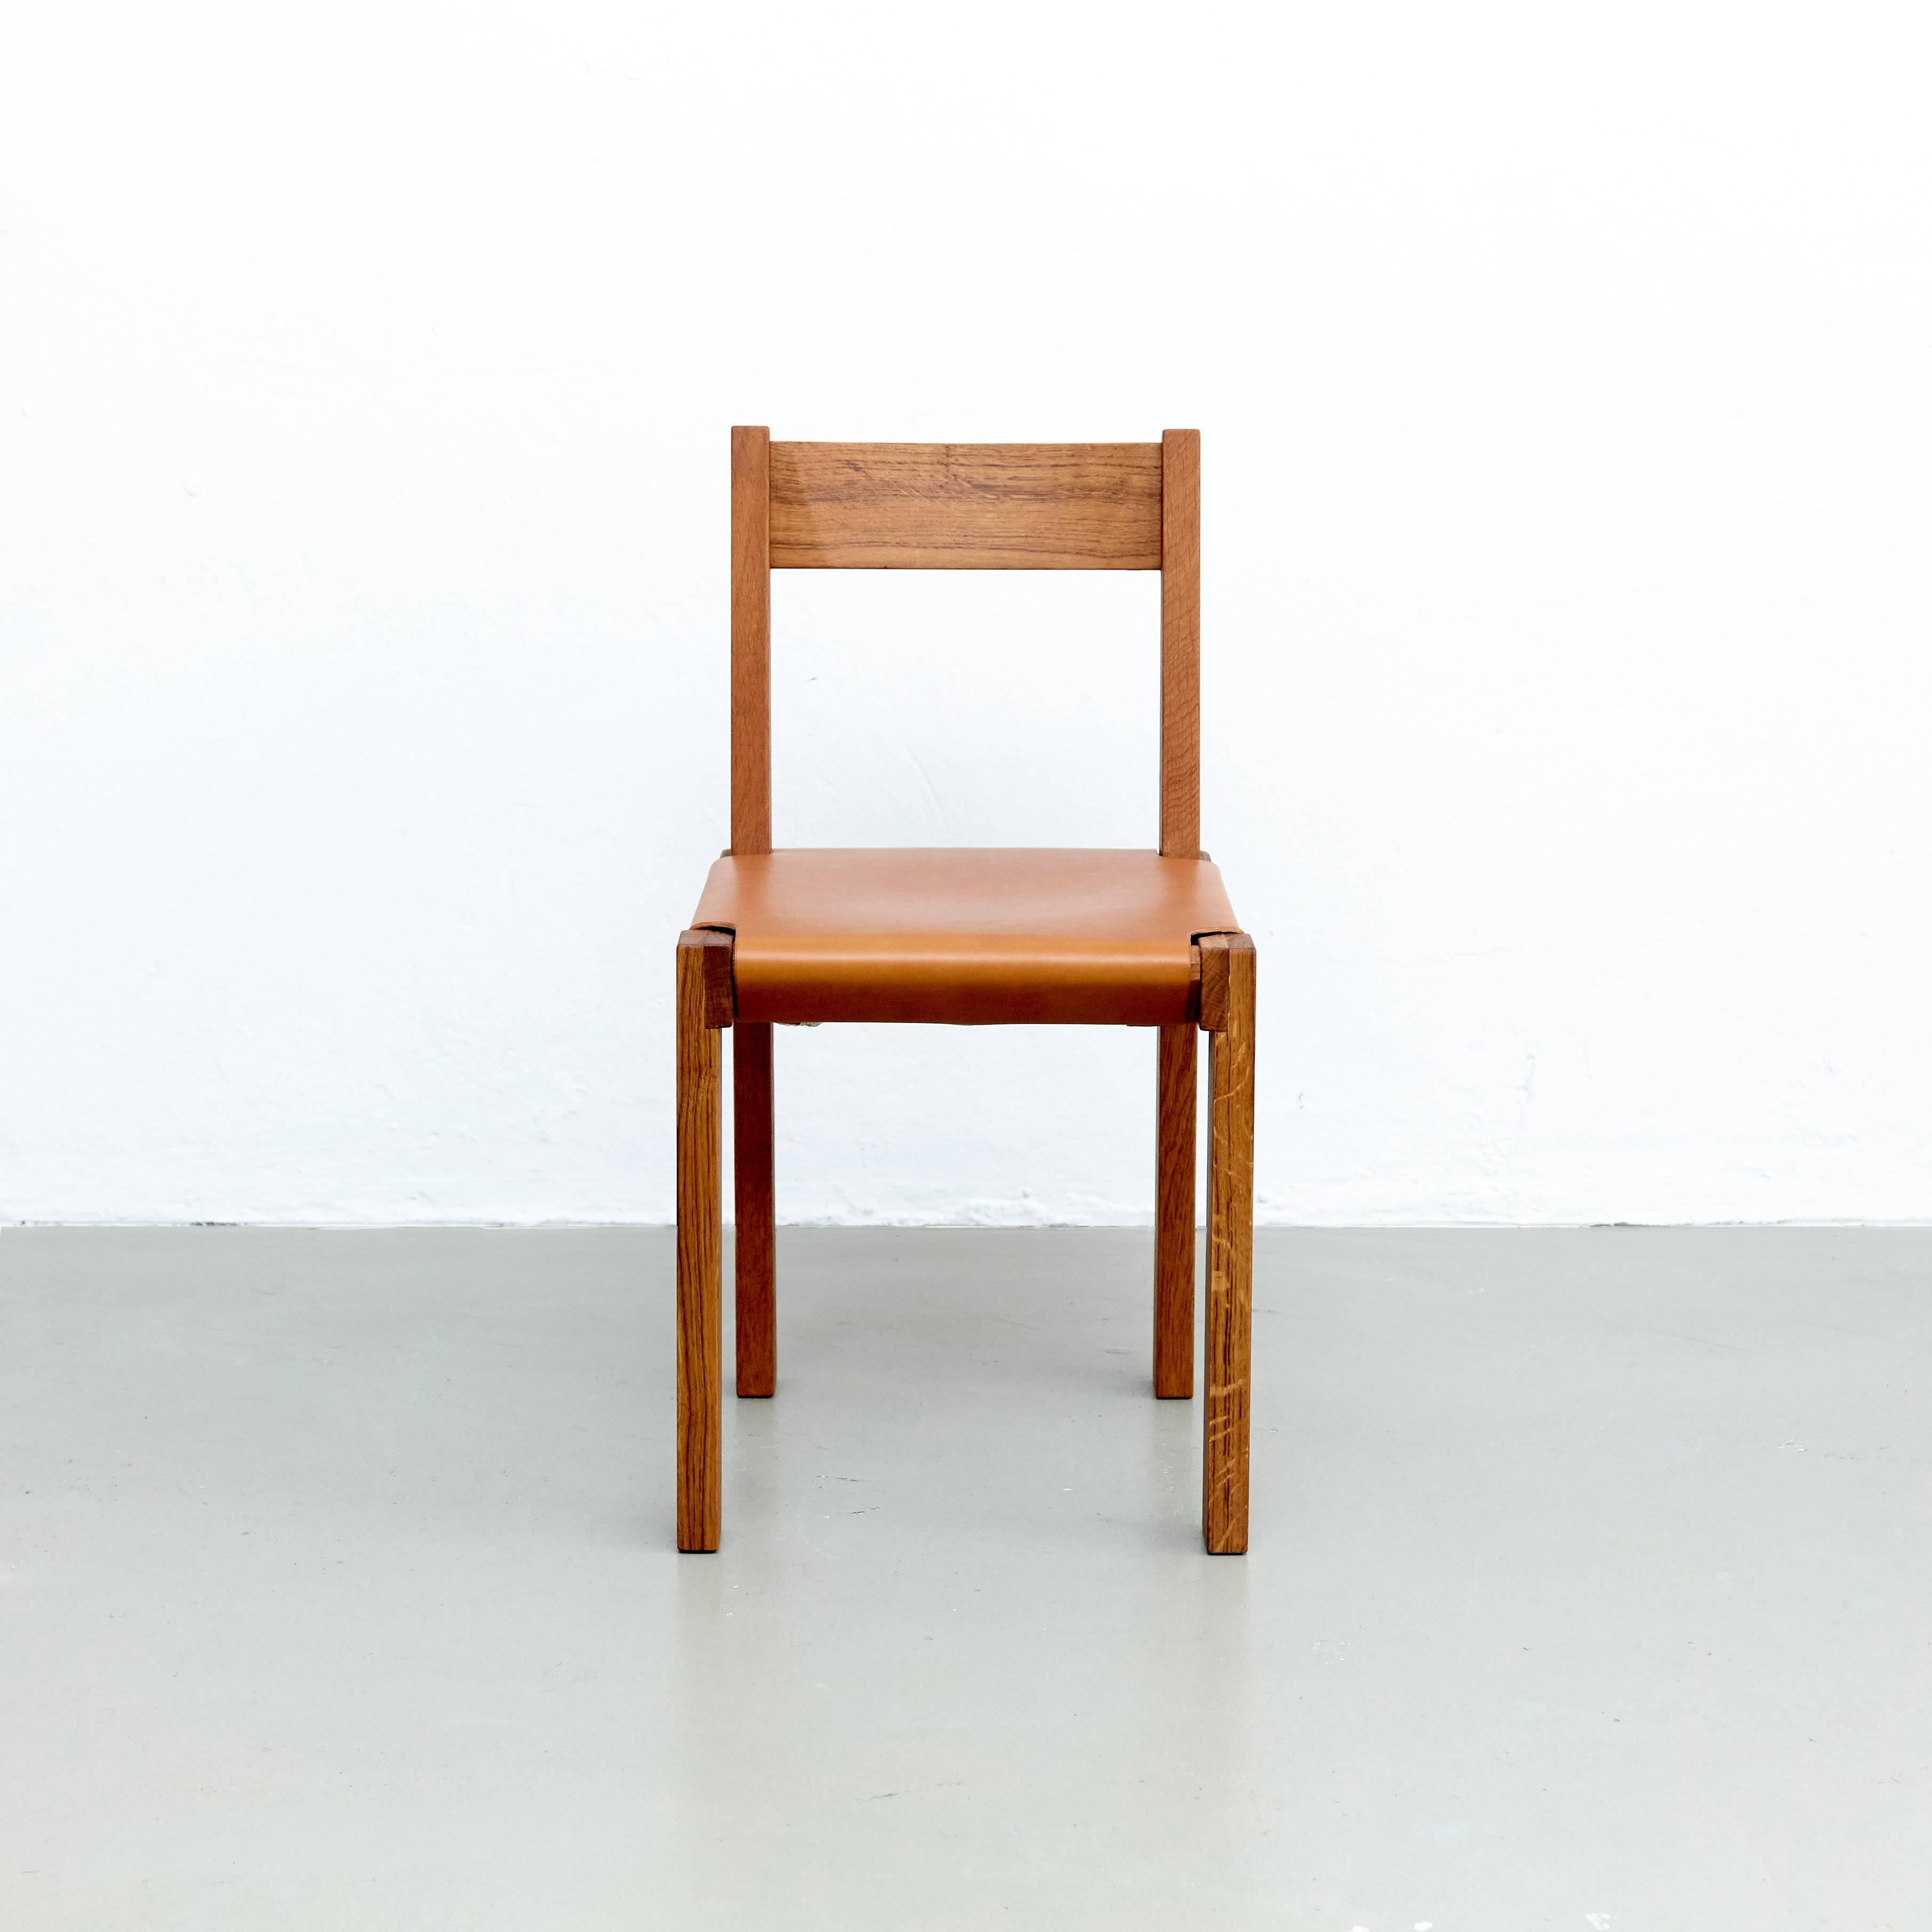 S 24 chair designed by Pierre Chapo, circa 1960.
Manufactured by Chapo Creation in France, 2017.
Solid oakwood, Seat stretched in thick leather.

In good original condition, with minor wear consistent with age and use, preserving a beautiful